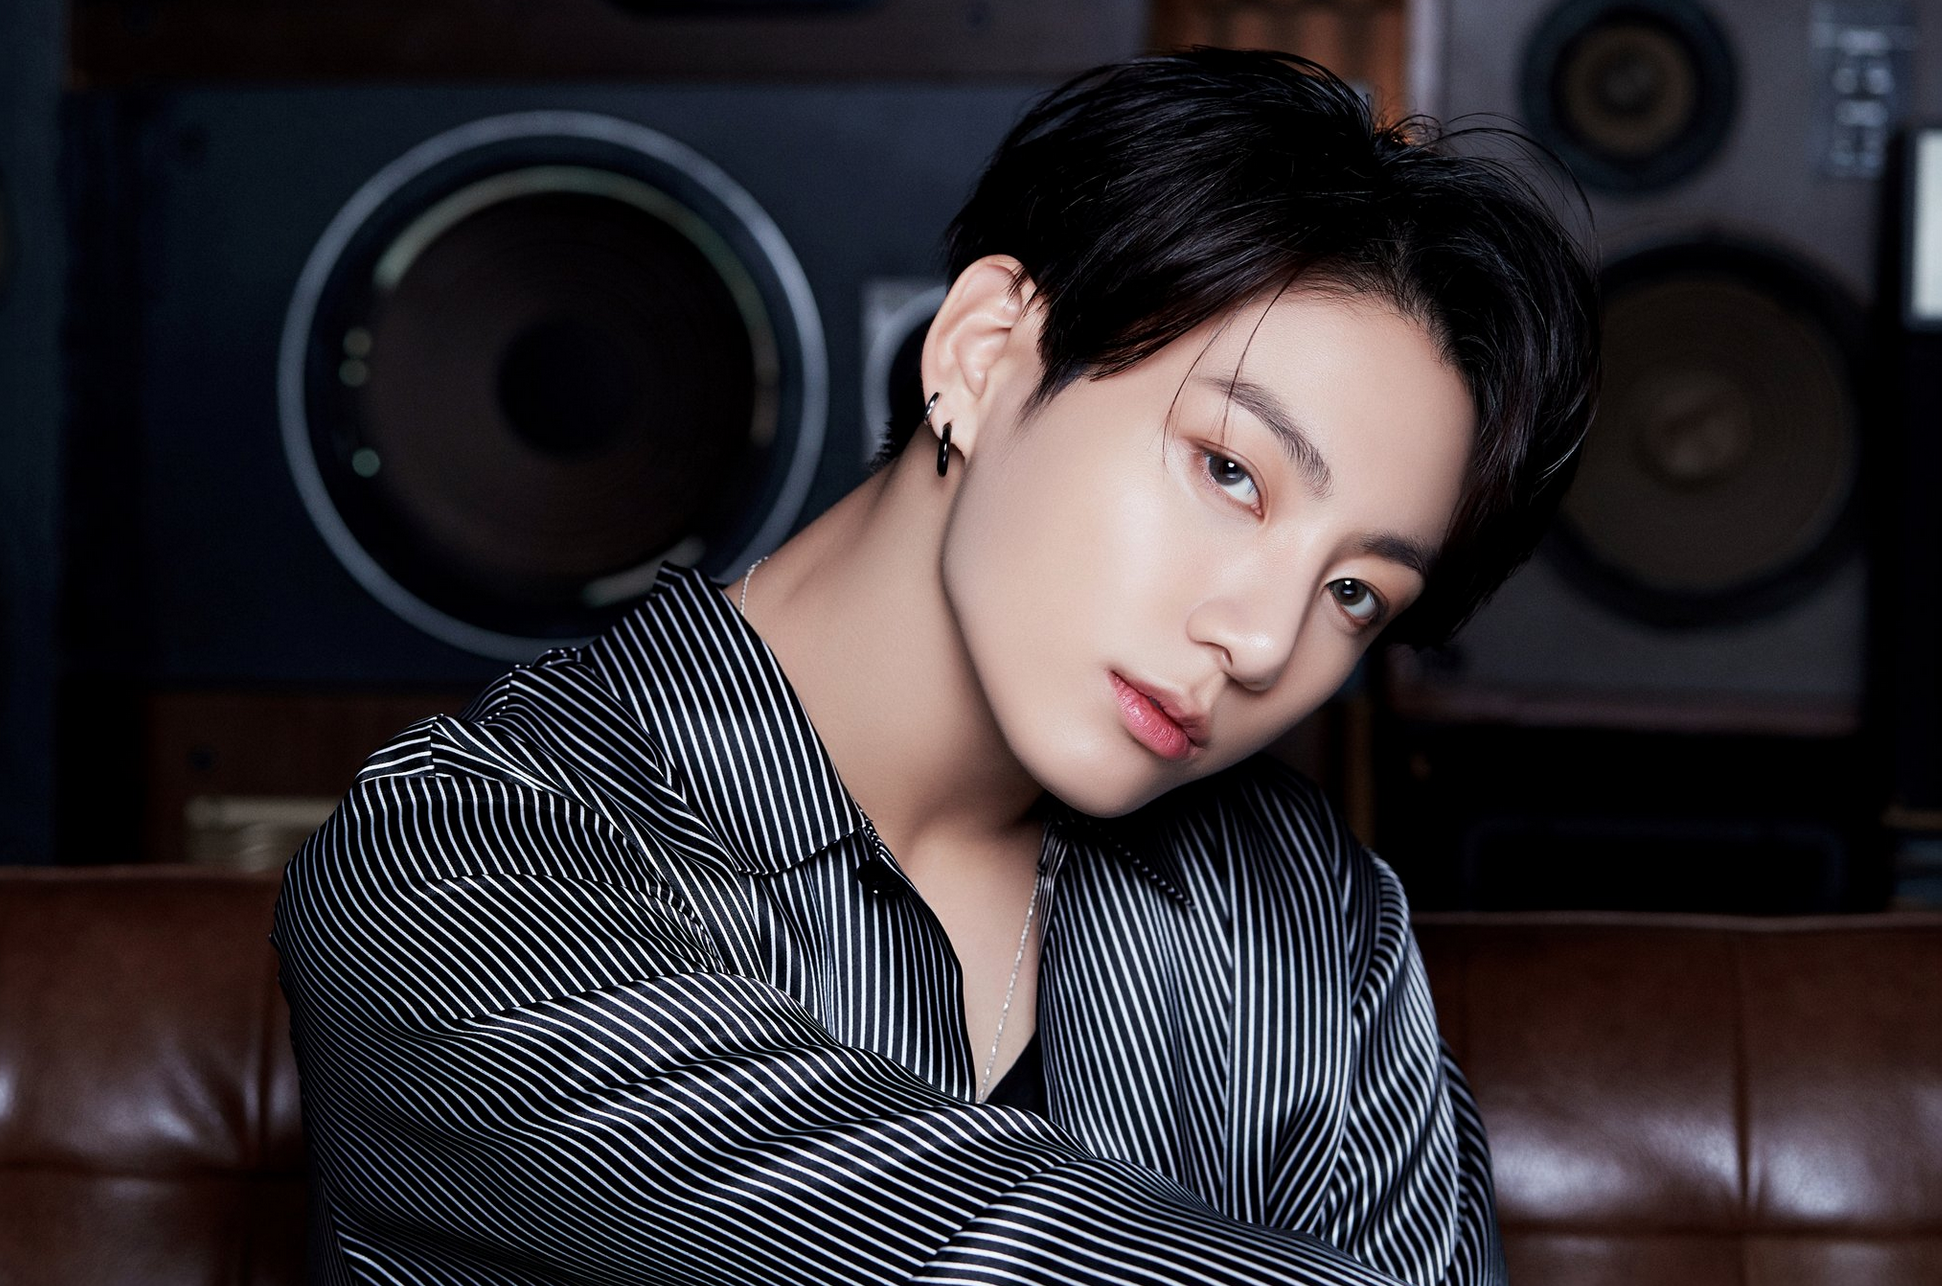 King for a reason: Fans take pride as BTS' Jungkook becomes the first  K-pop soloist to surpass 4 billion streams on Spotify